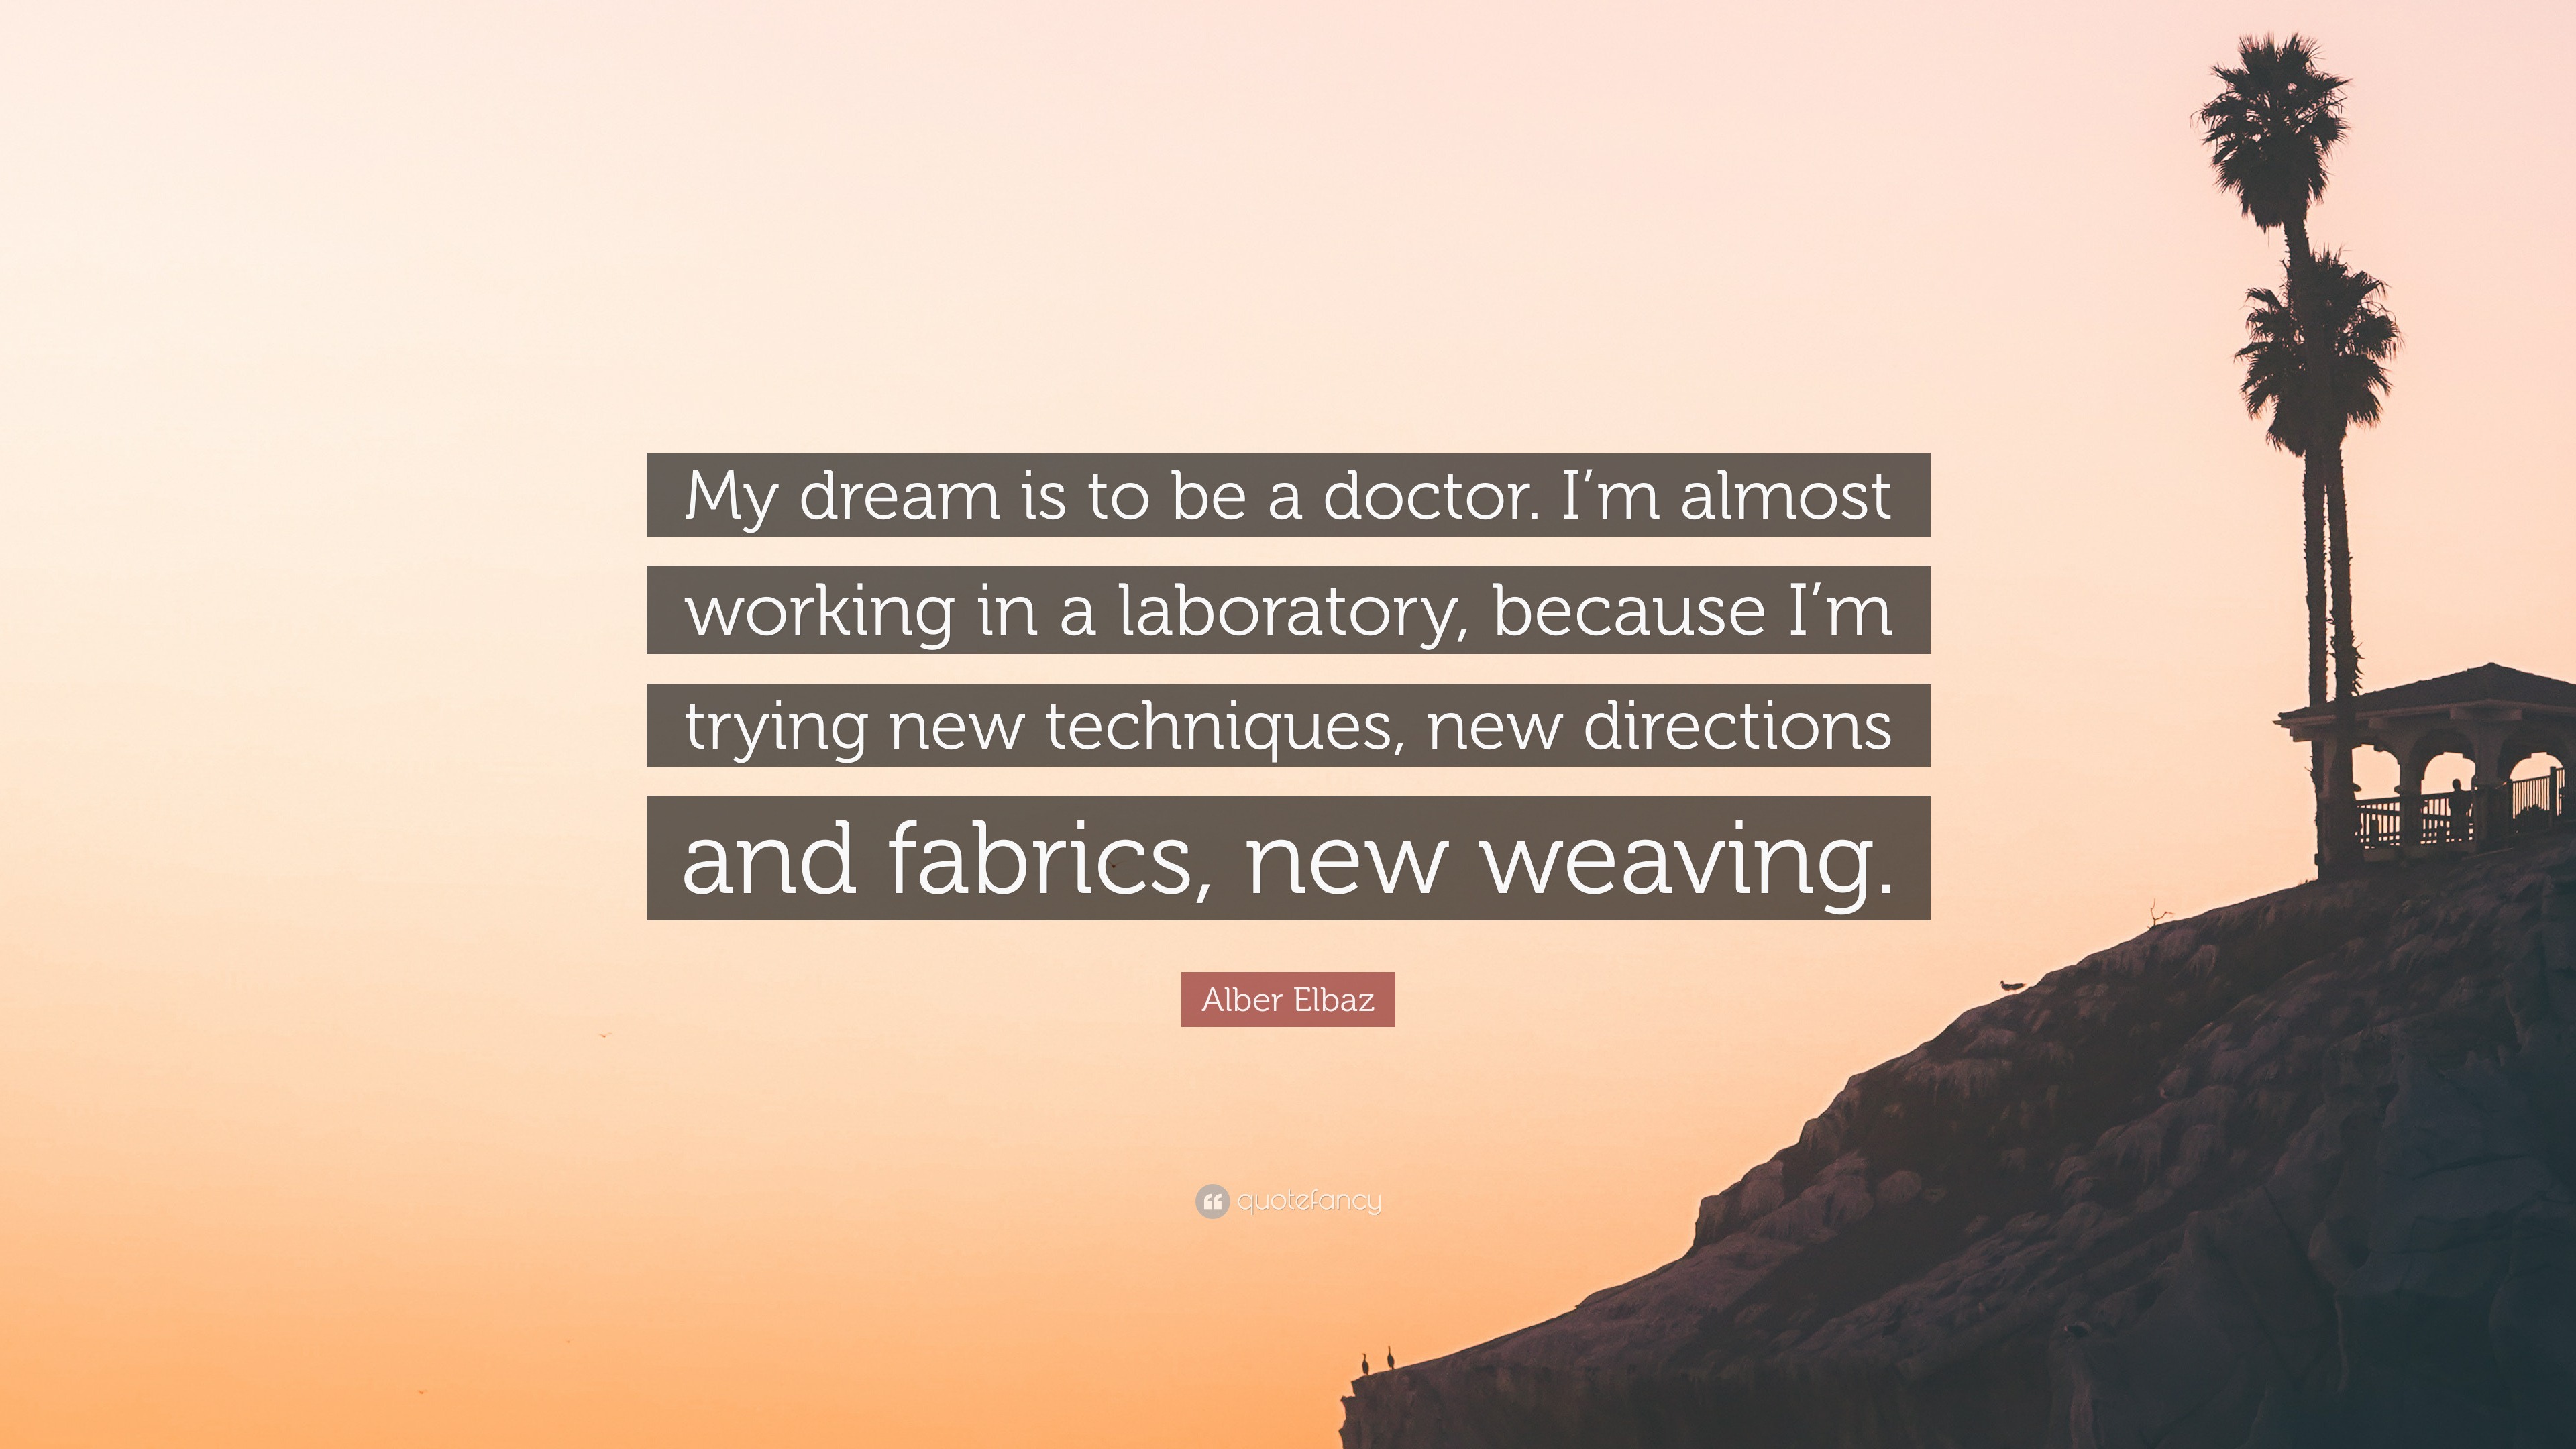 Alber Elbaz Quote: “My dream is to be a doctor. I'm almost working in a  laboratory, because I'm trying new techniques, new directions and fa”